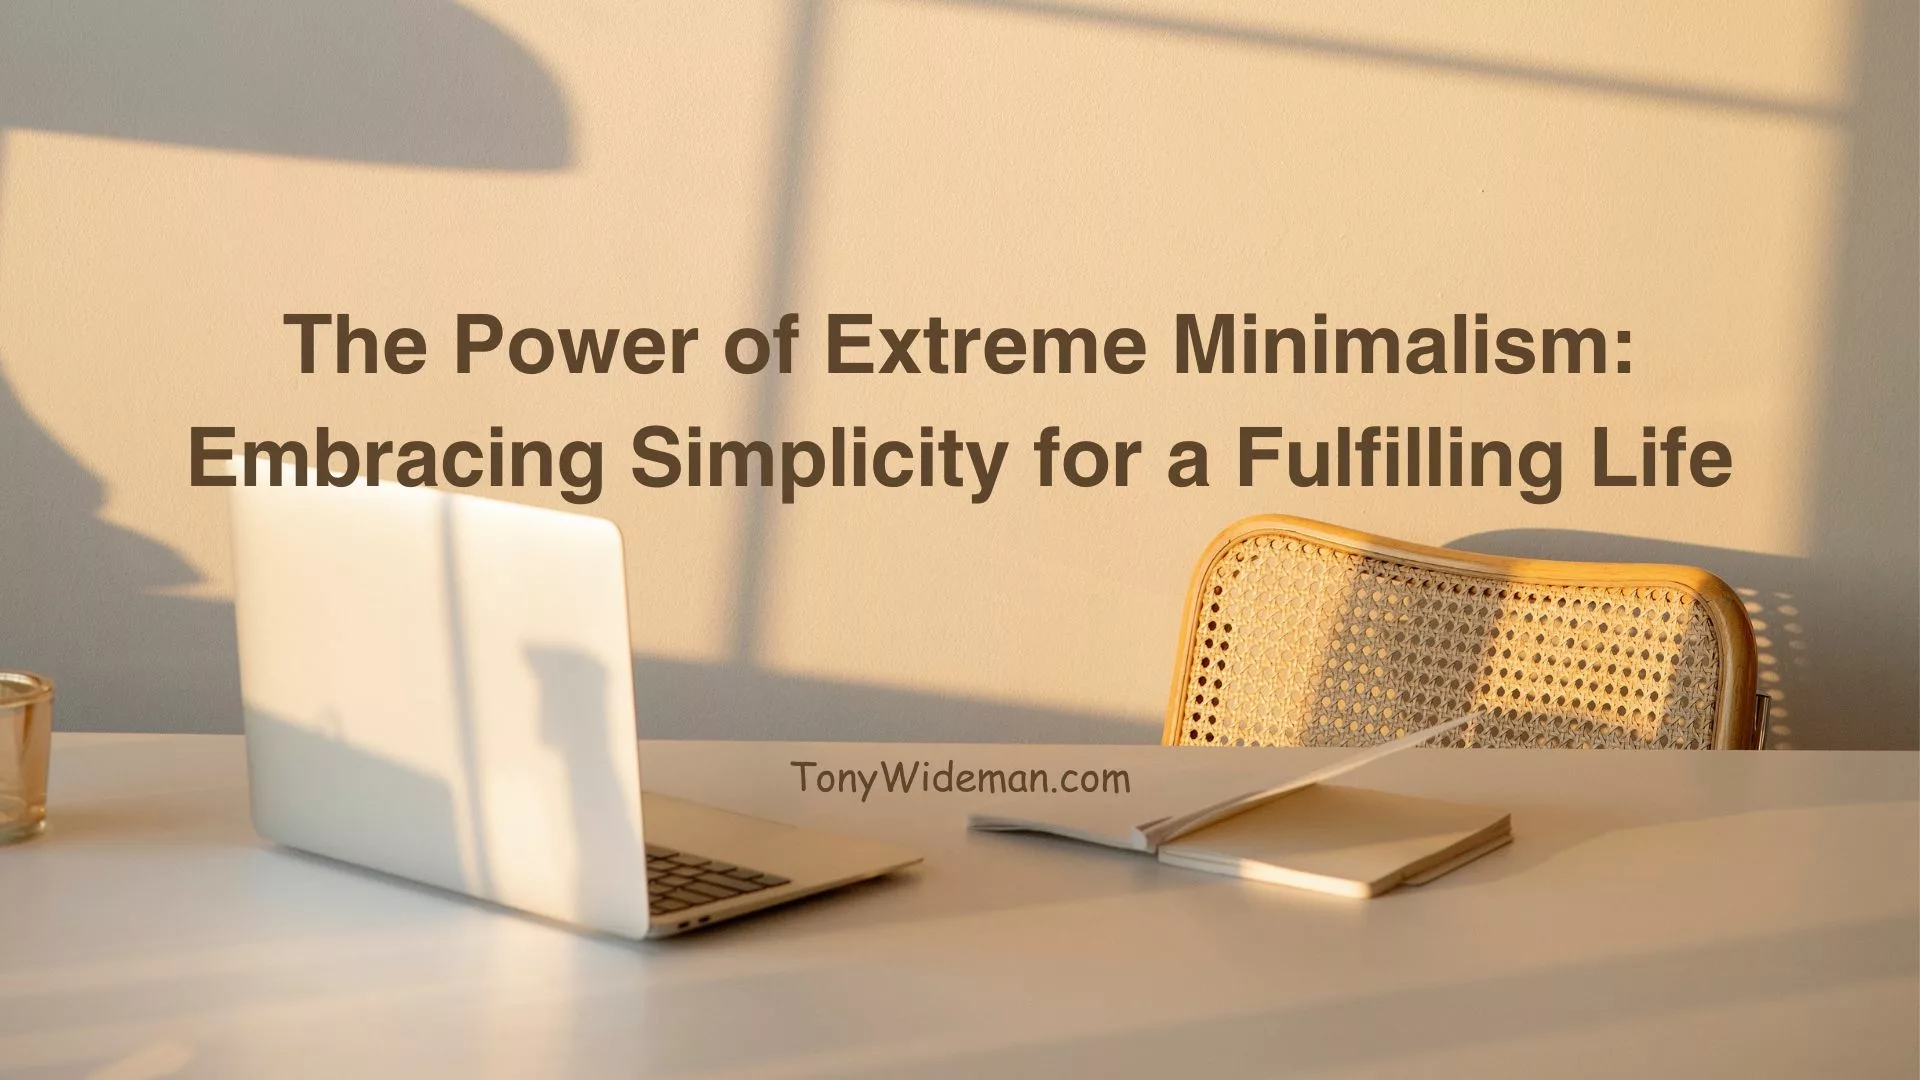 Extreme Minimalism: Embracing Simplicity for a Fulfilling Life